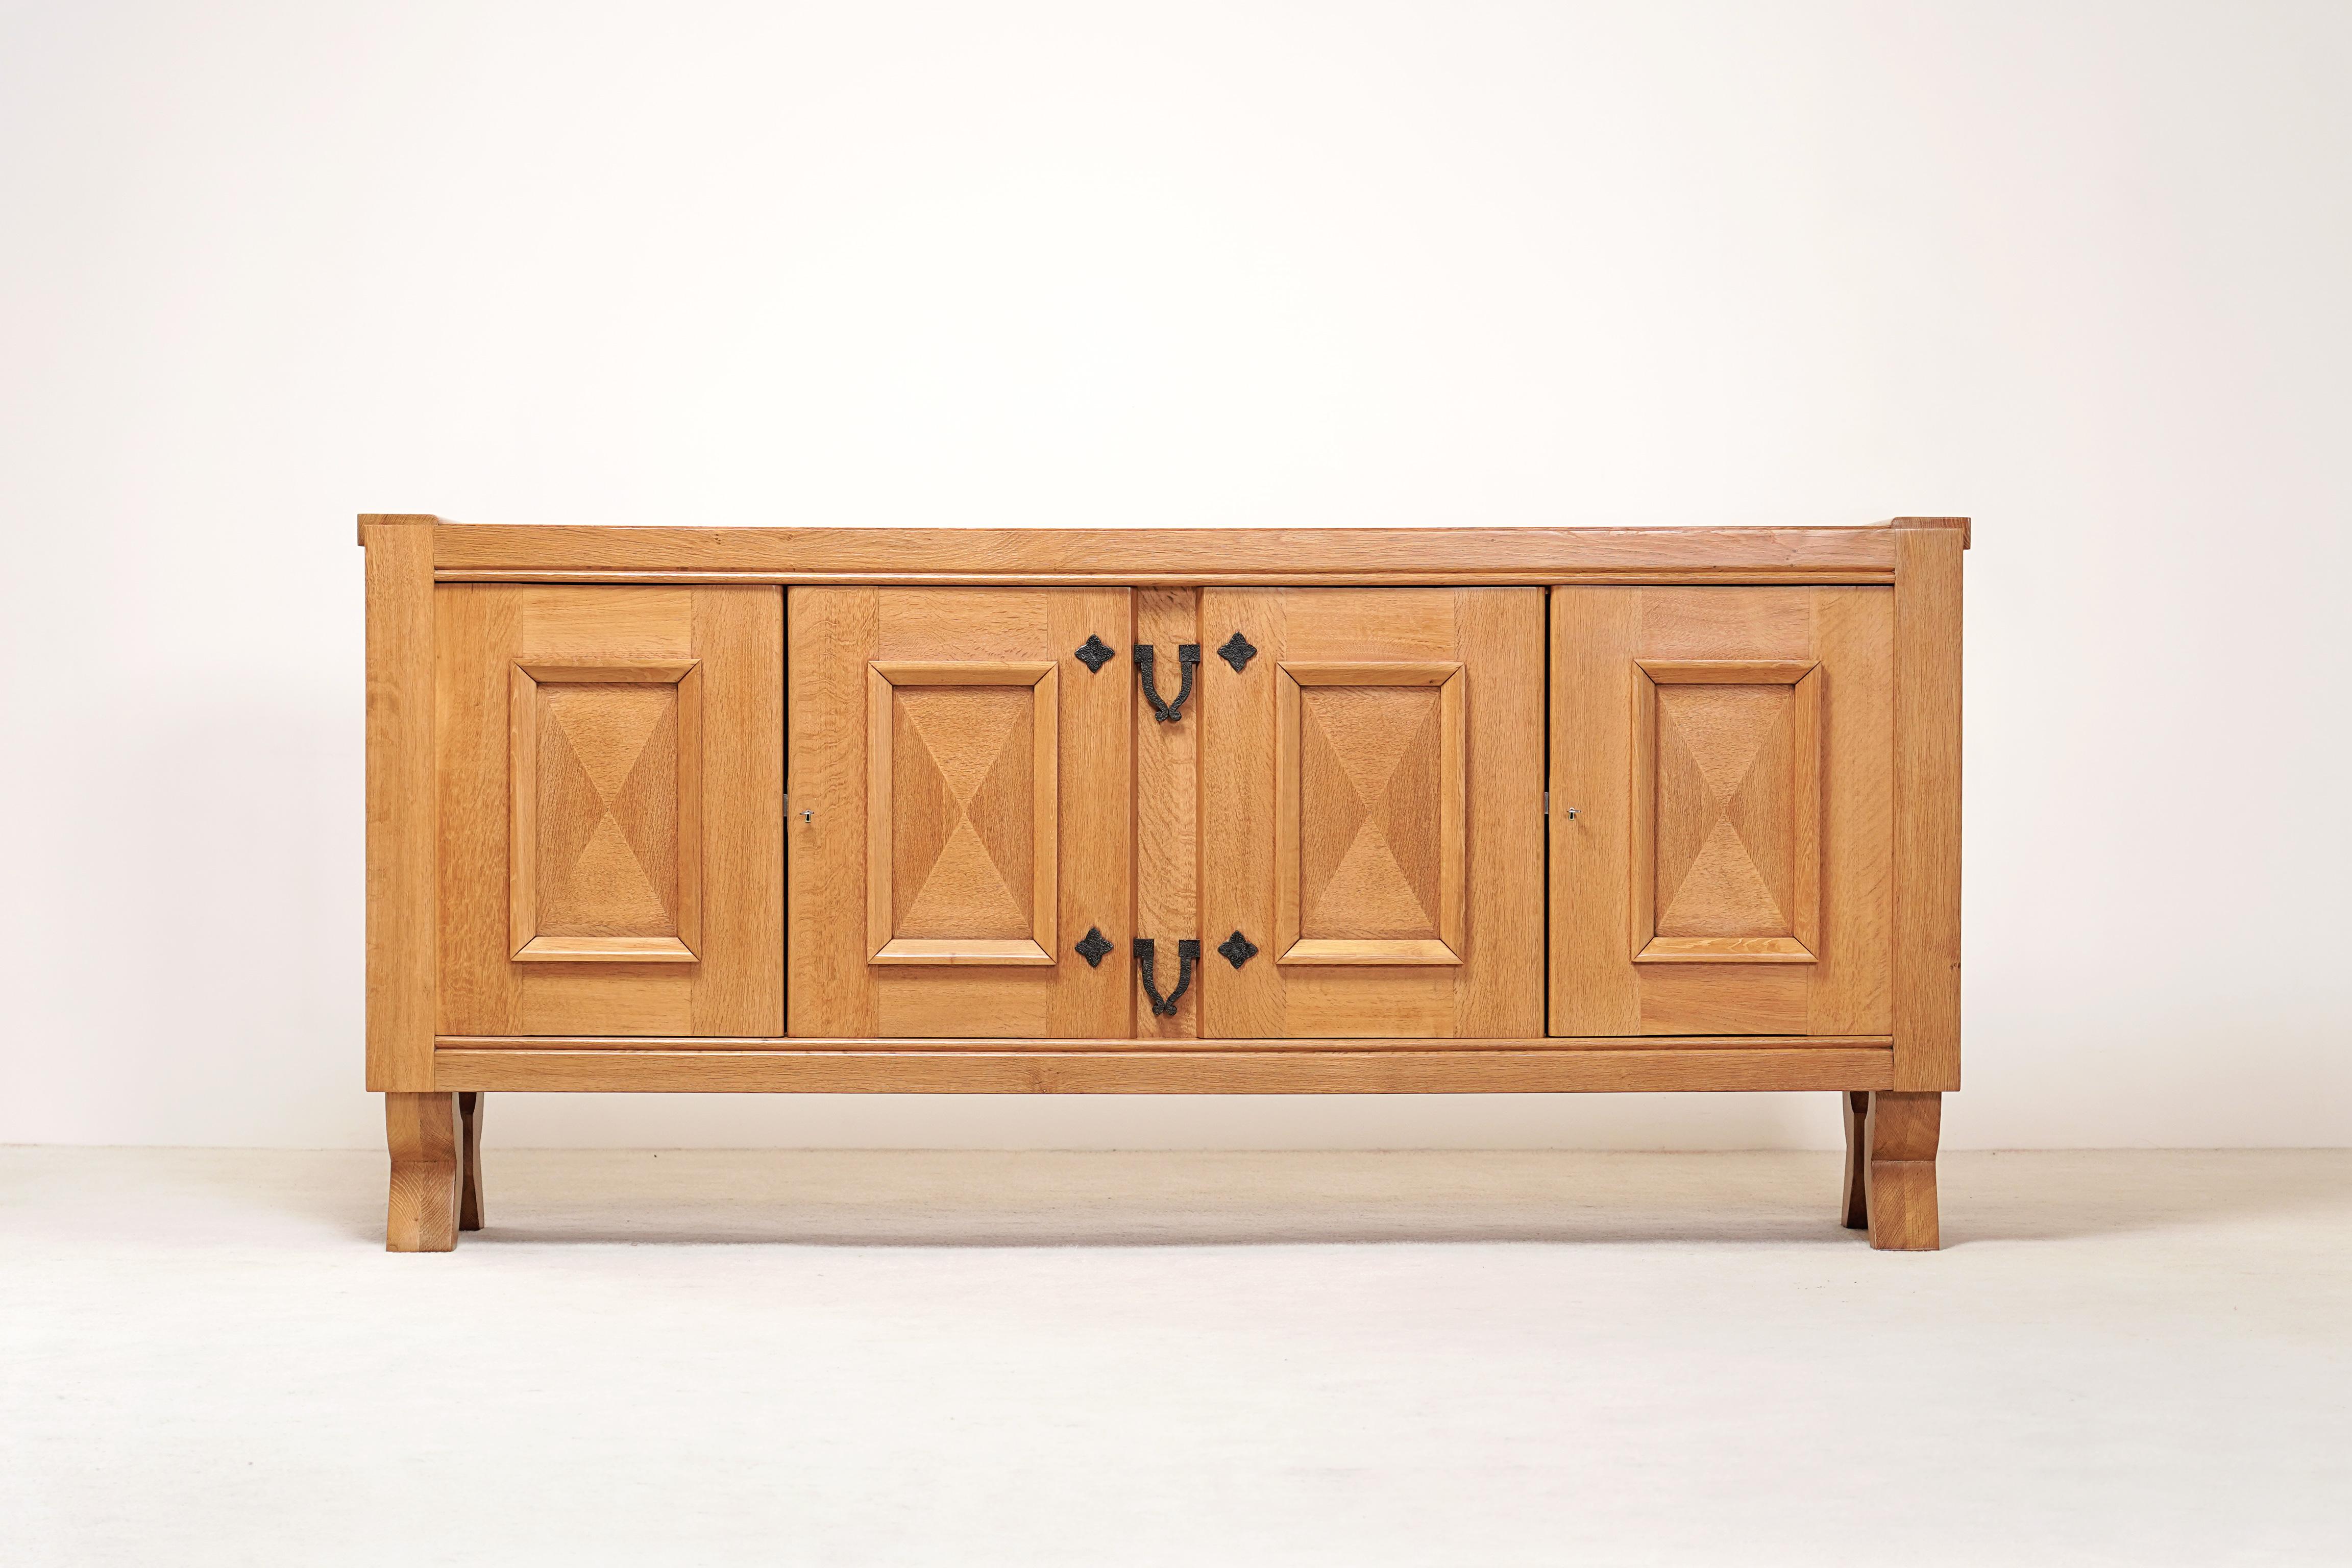 Guillerme et Chambron, Rare Sideboard in Oak from the early period of French company 